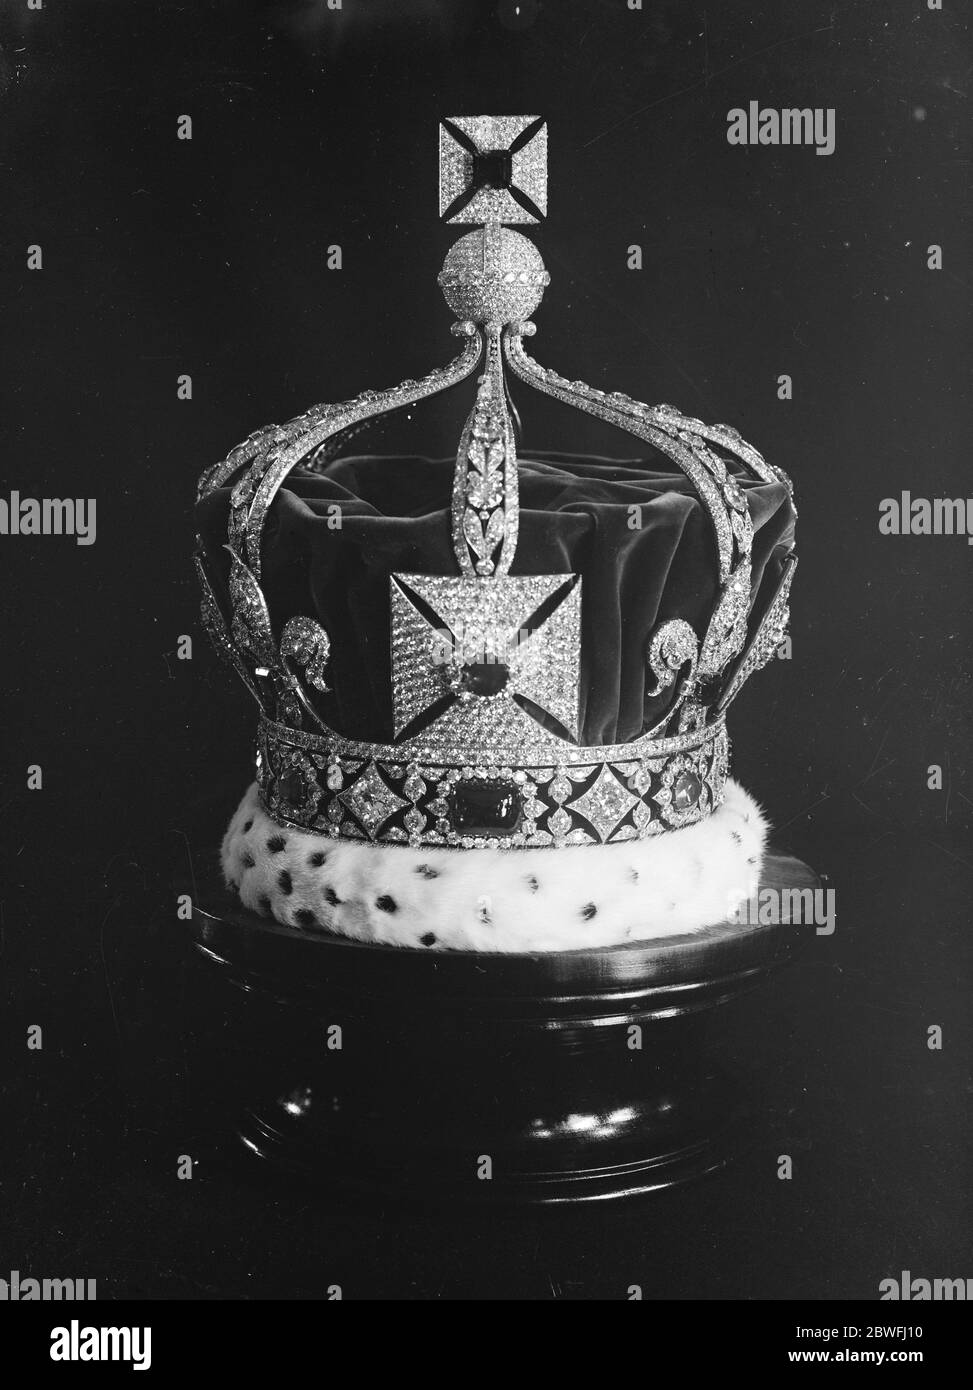 queen and smiling king with crowns holding hands isolated on grey Stock  Photo - Alamy